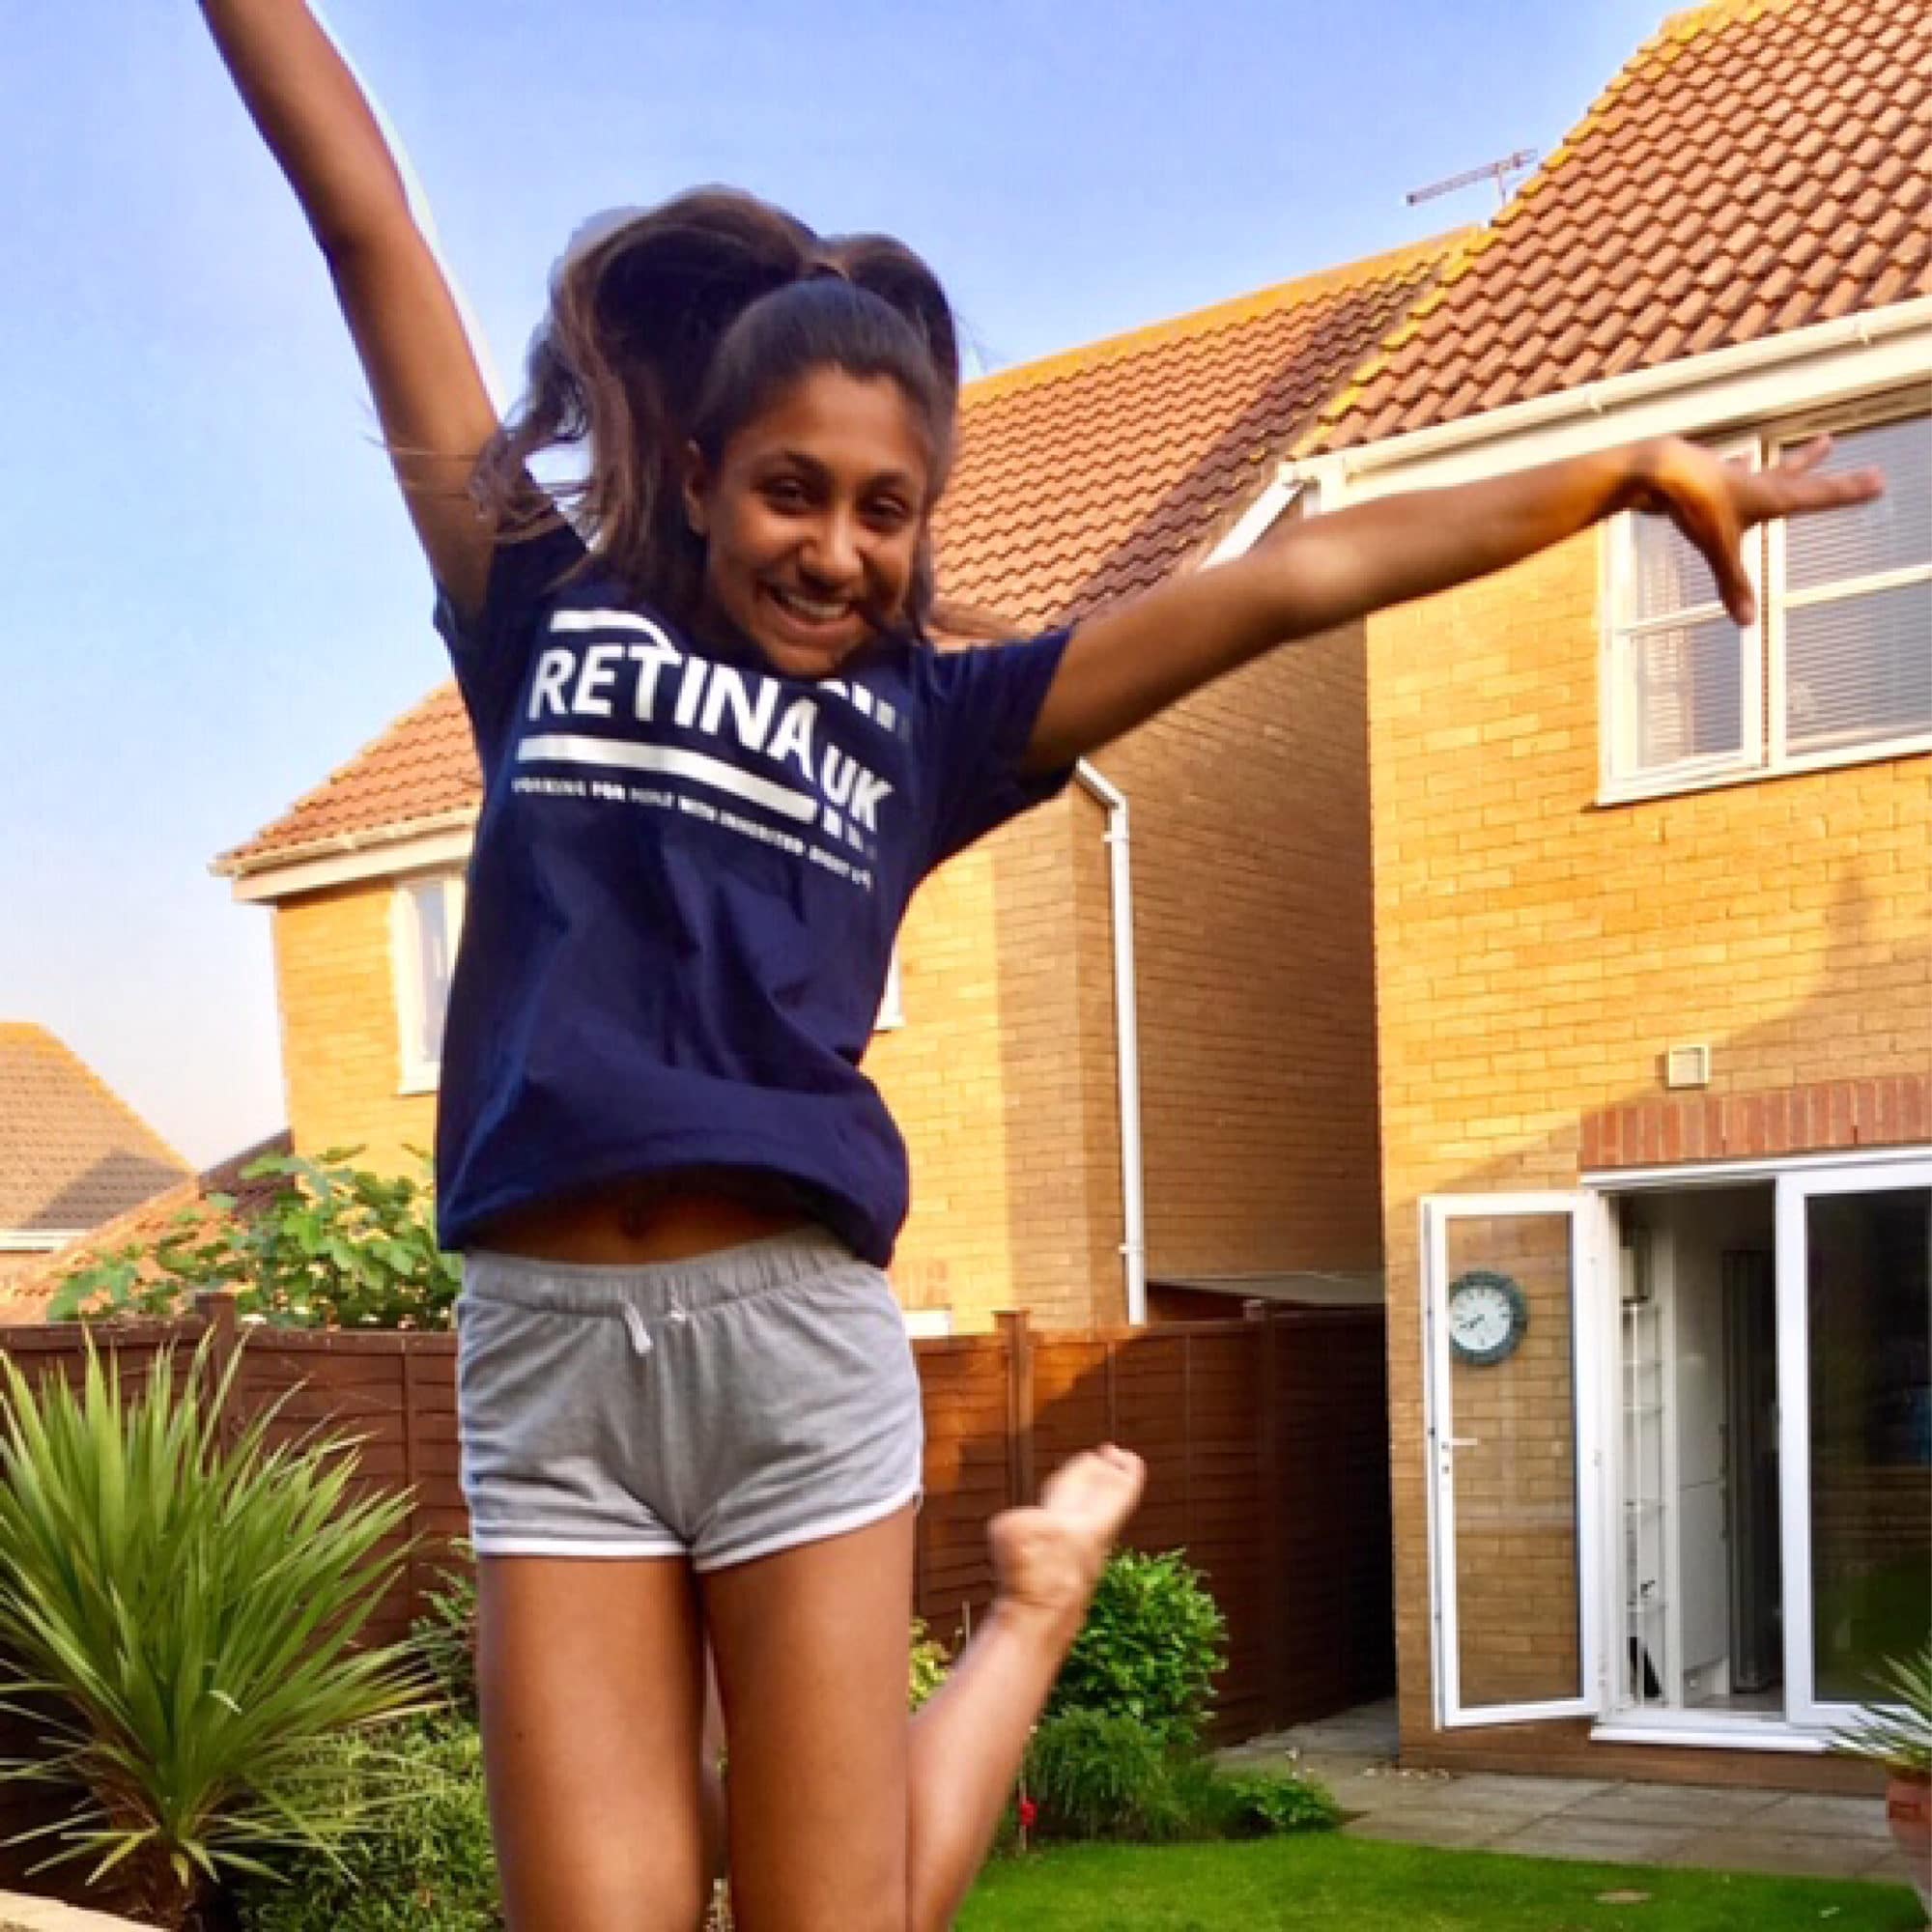 Image shows a young girl in a blue Retina UK t-shirt jumping into the air and smiling